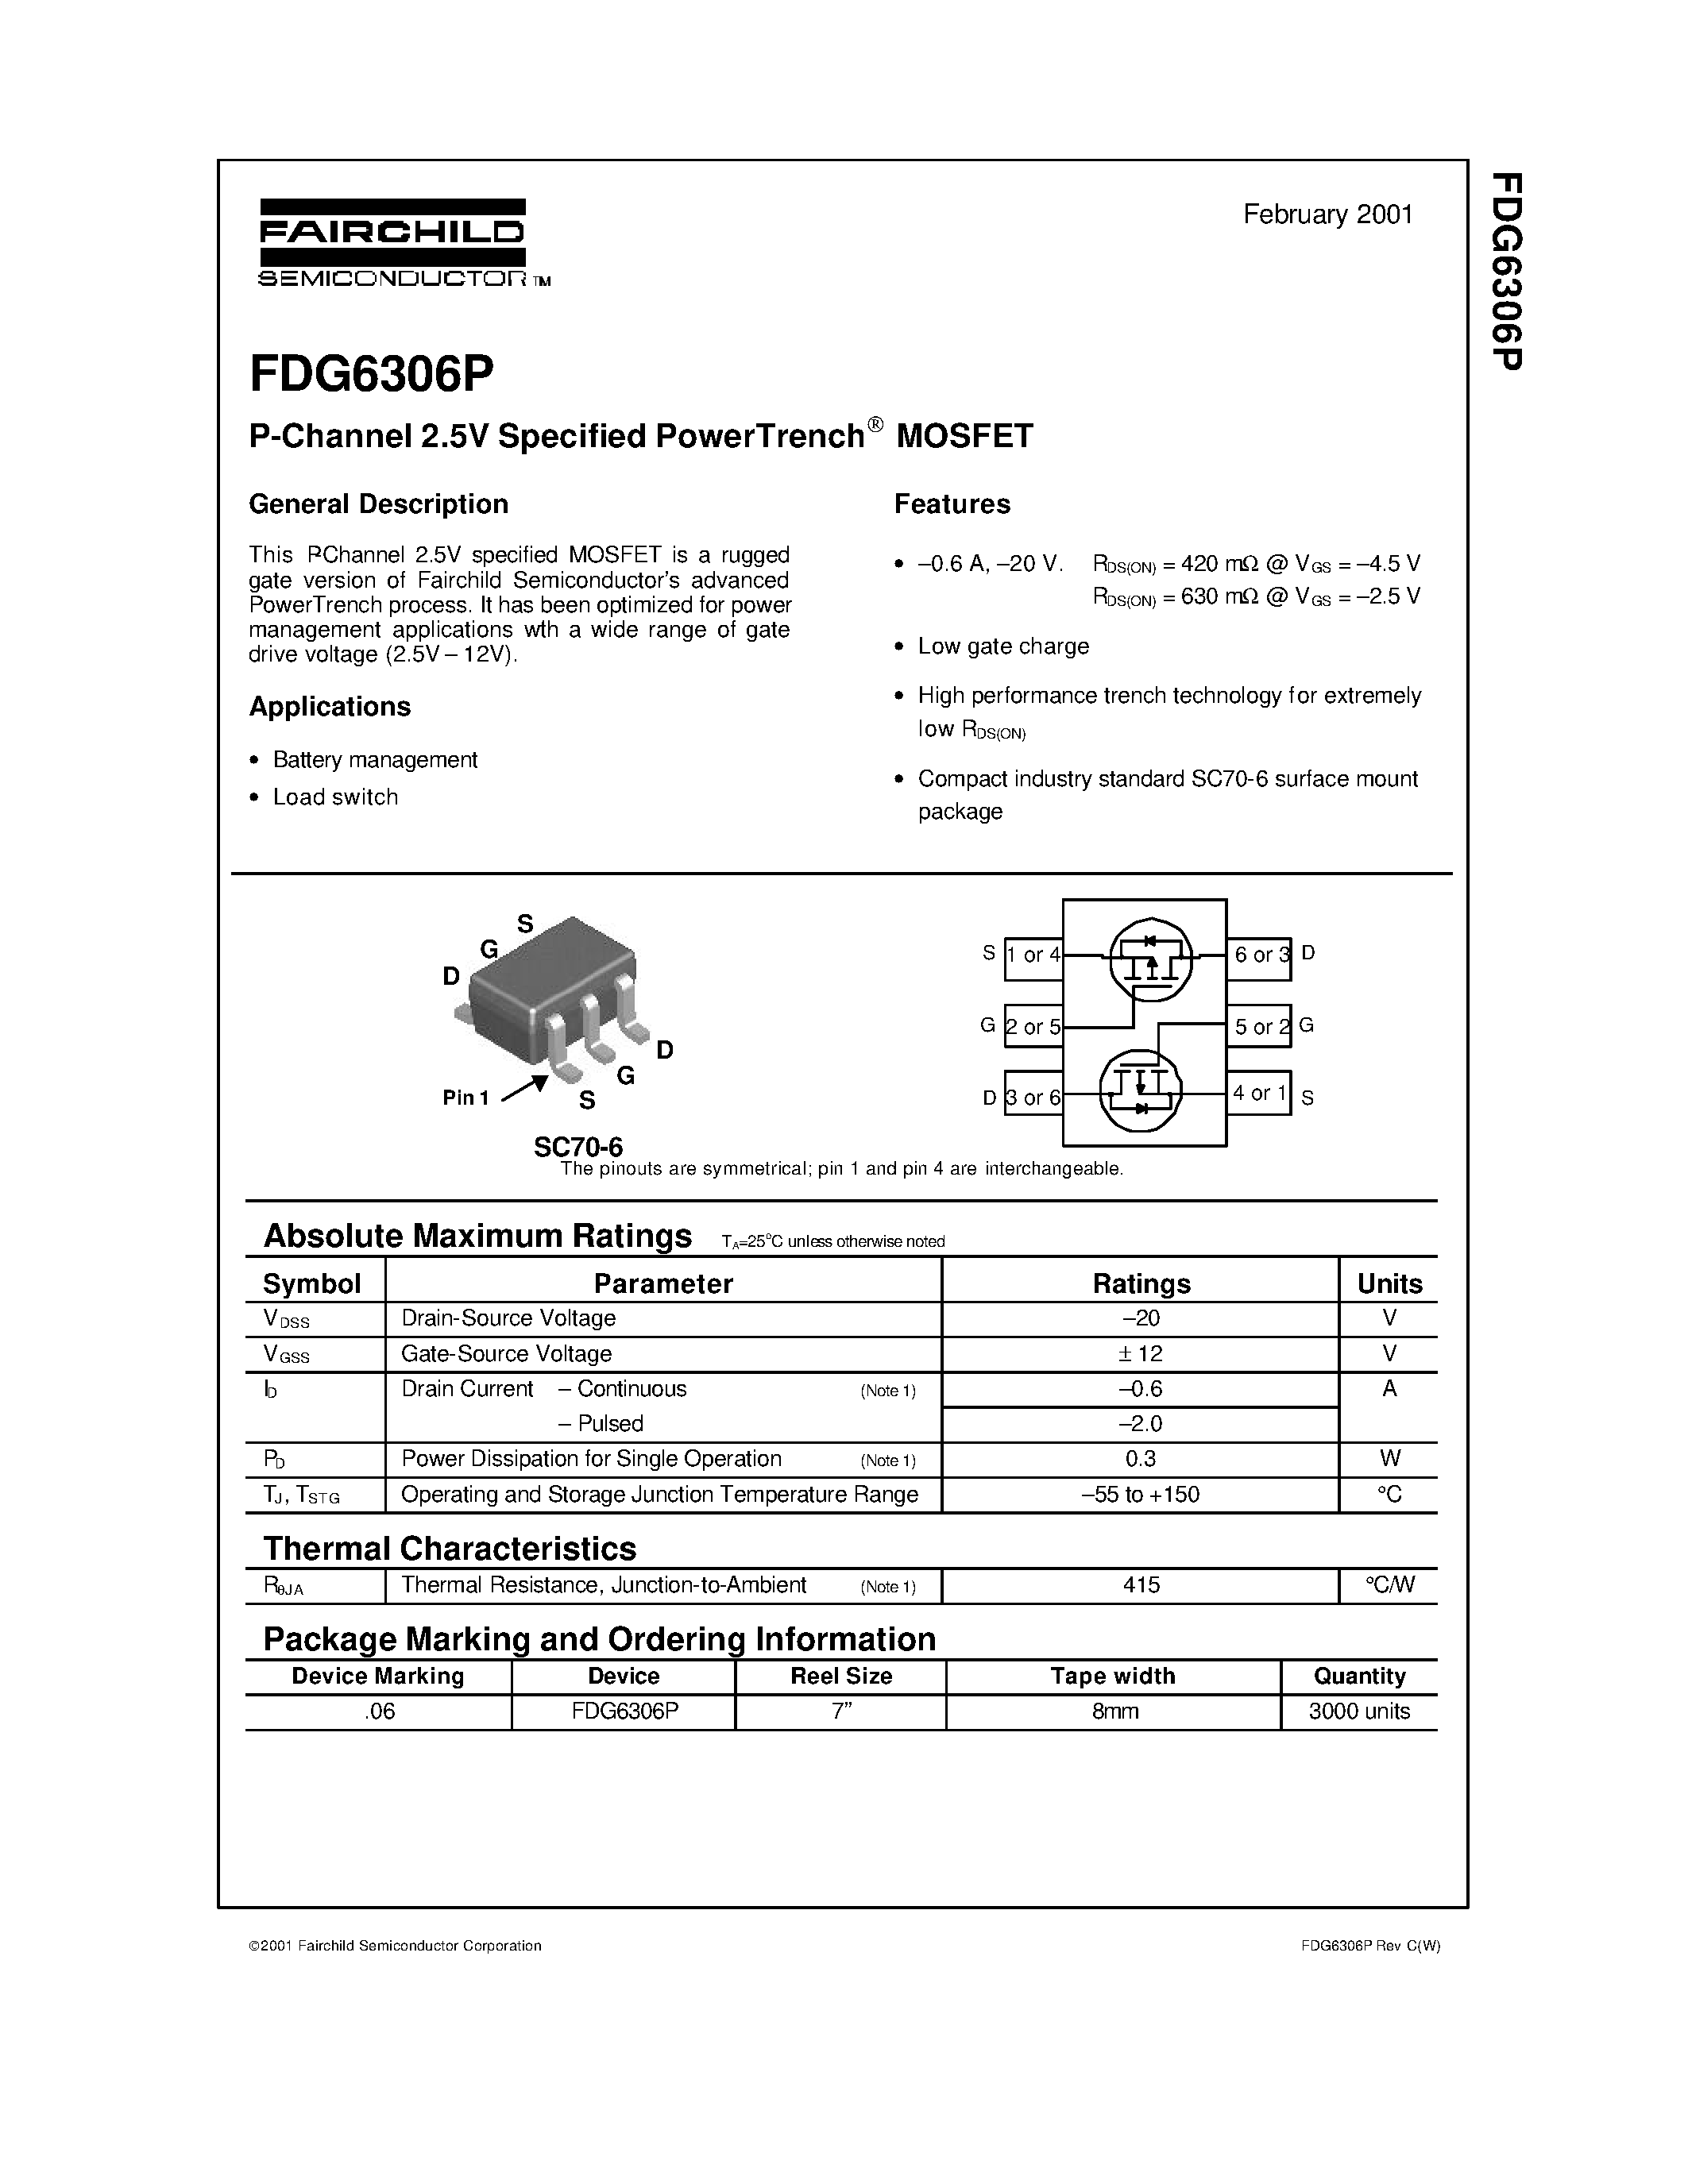 Даташит FDG6306P - P-Channel 2.5V Specified PowerTrench MOSFET страница 1